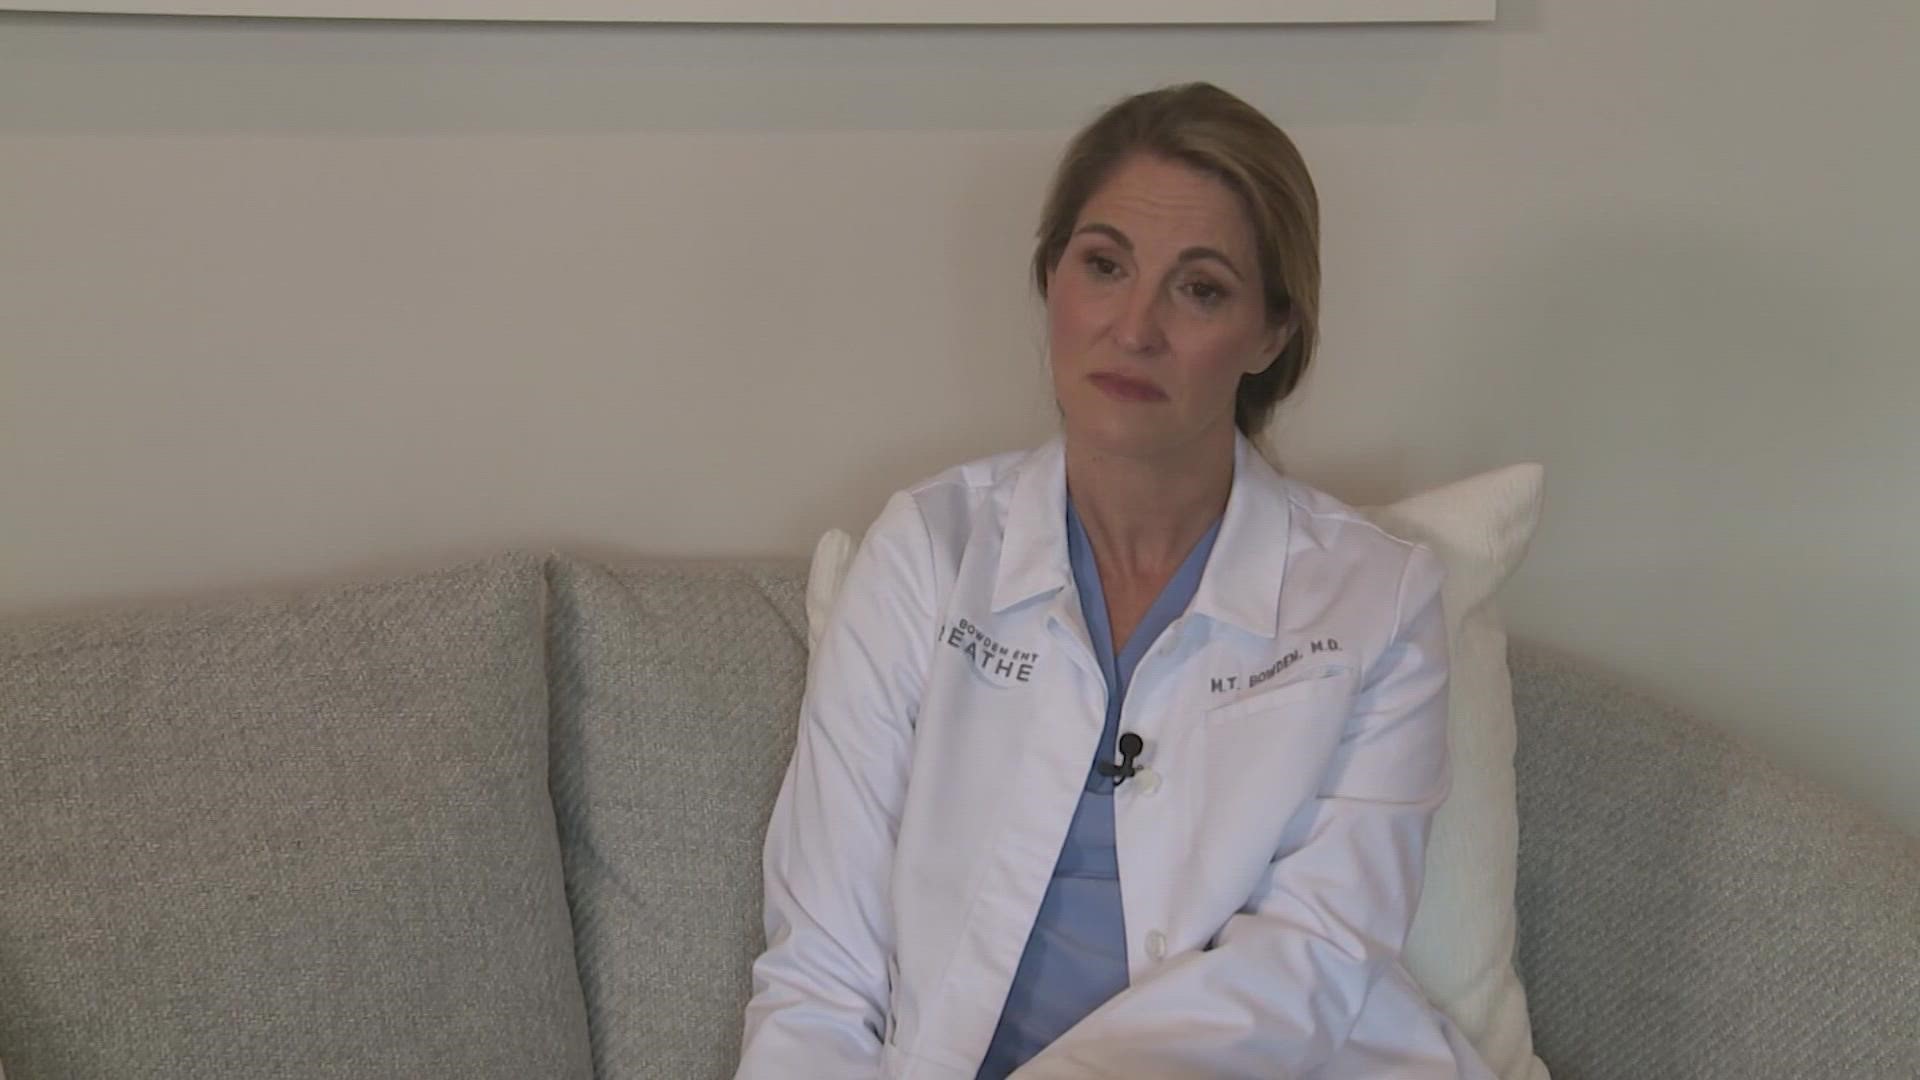 Dr. Mary Bowden resigned from Houston Methodist after the hospital claimed she was spreading misinformation about COVID-19 on social media.